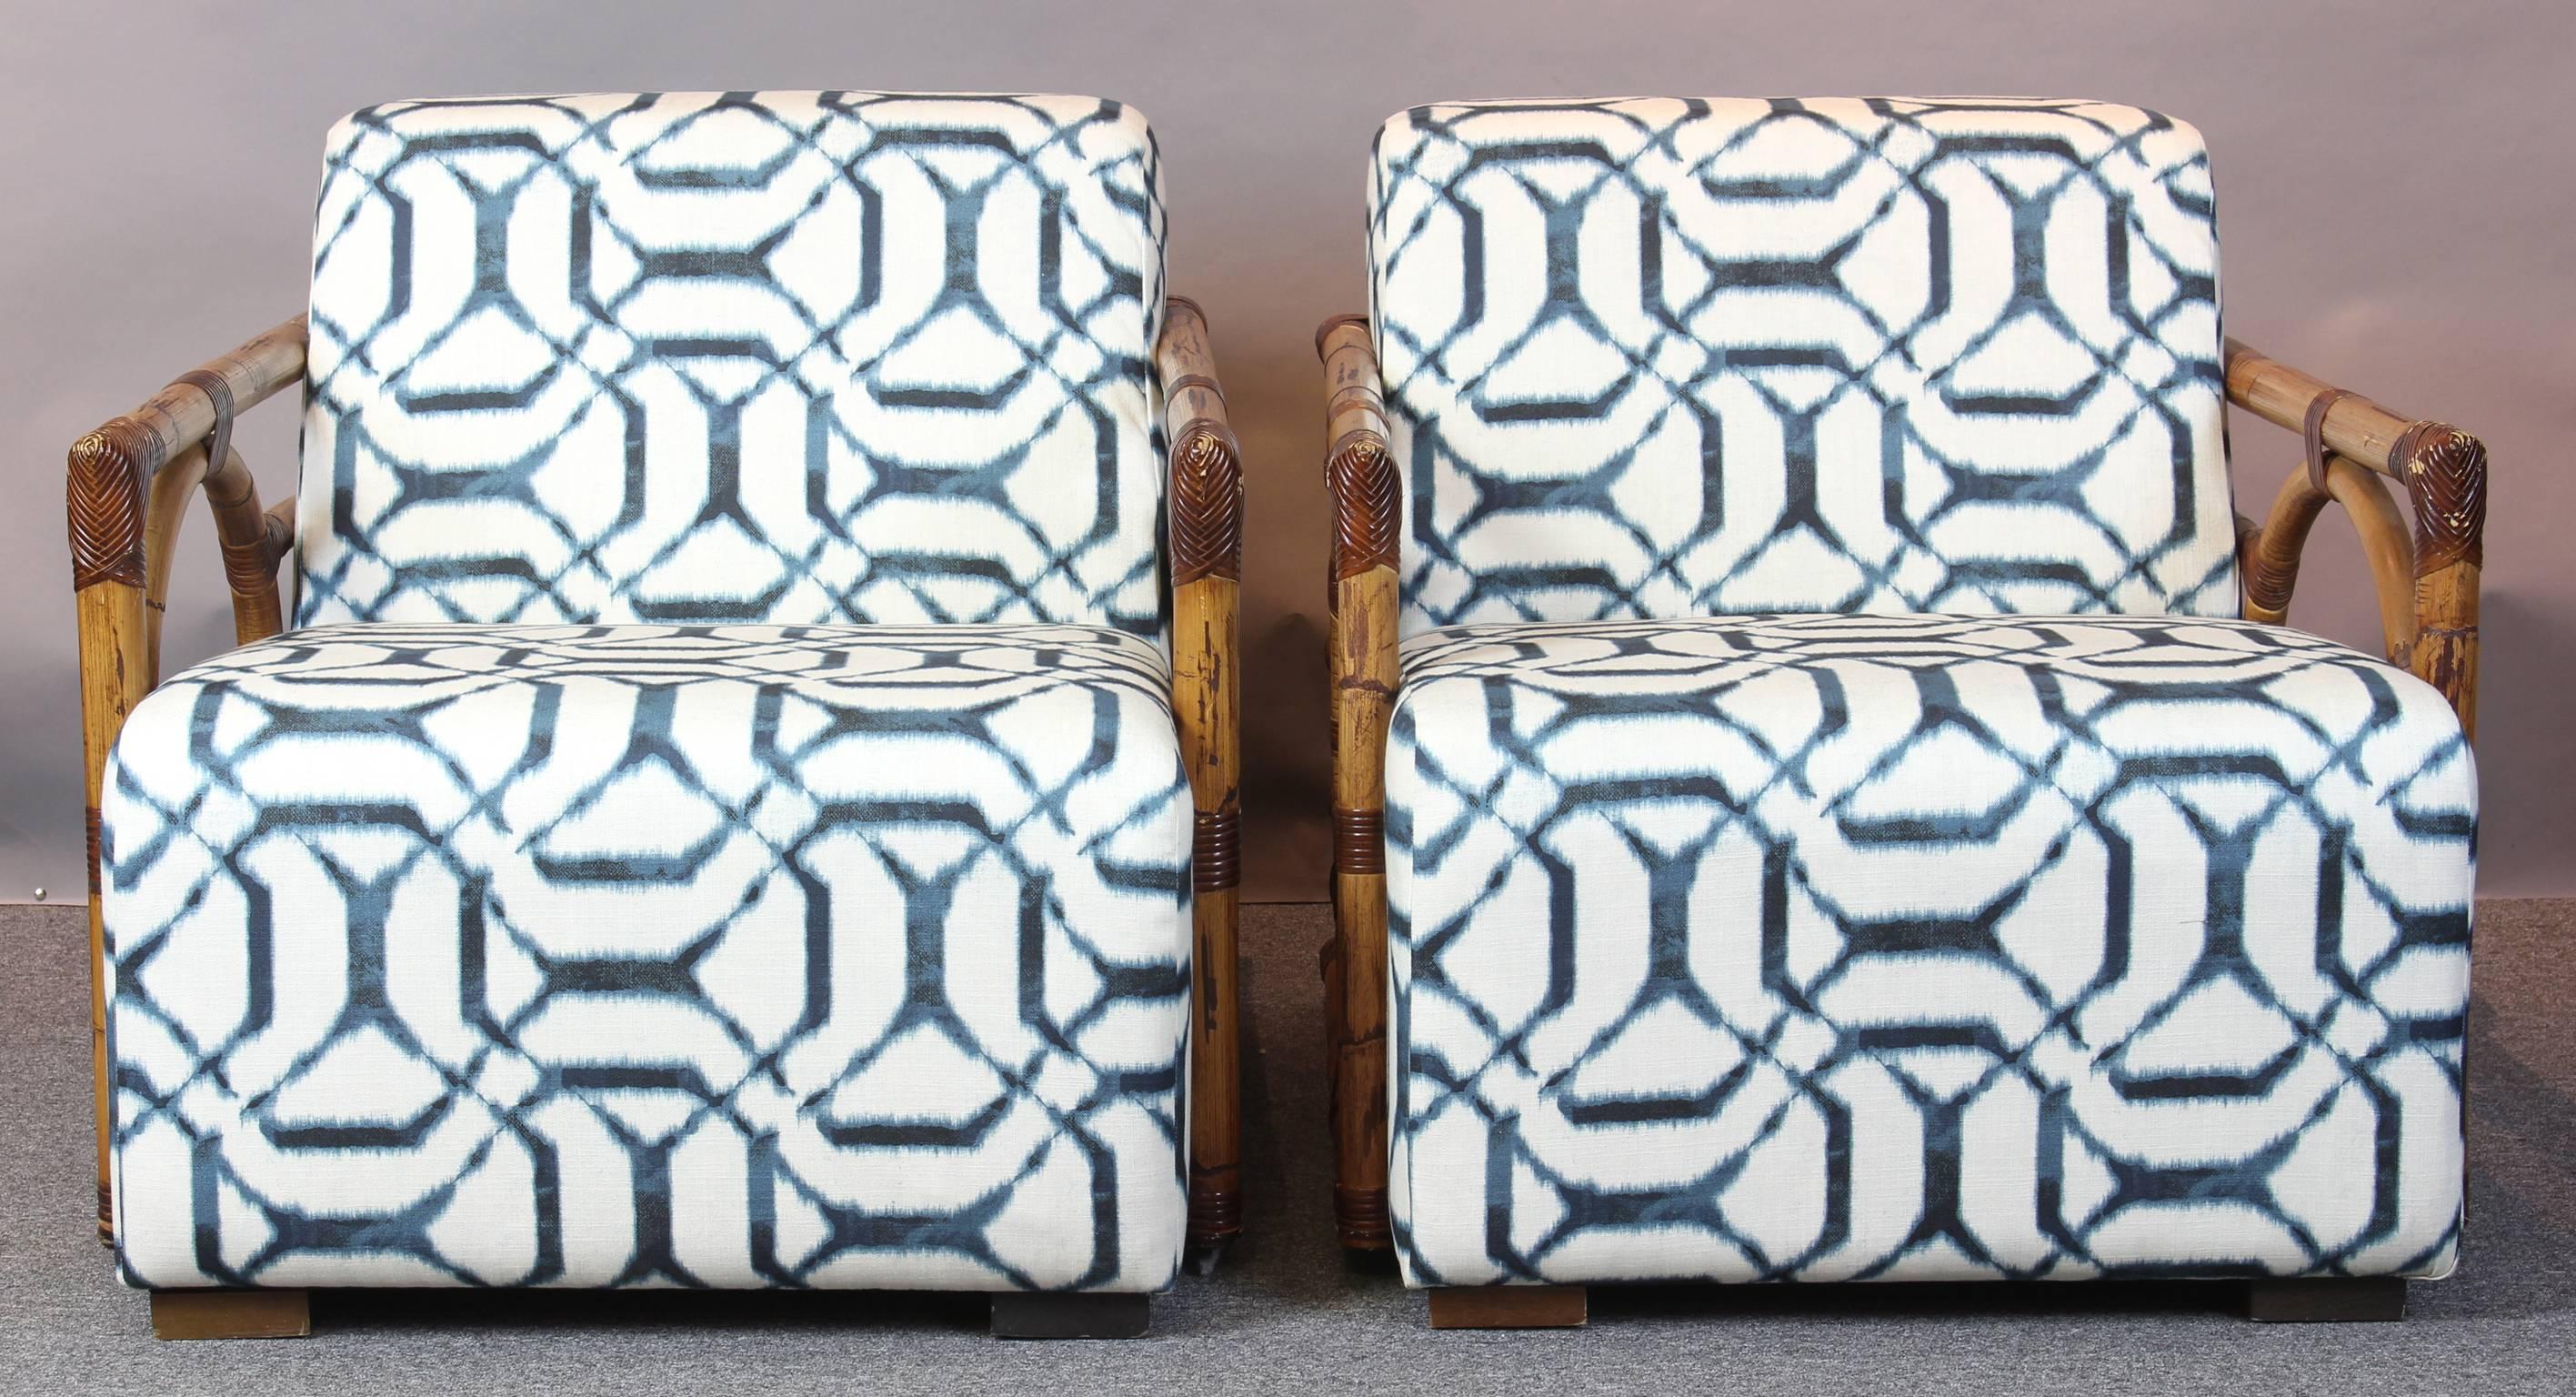 A wonderful pair of highly decorative Art Deco inspired rattan lounge chairs. The rattan displays exceptional color and finish, all bindings are complete and intact. The chairs have been recently upholstered in a cotton ikat fabric.